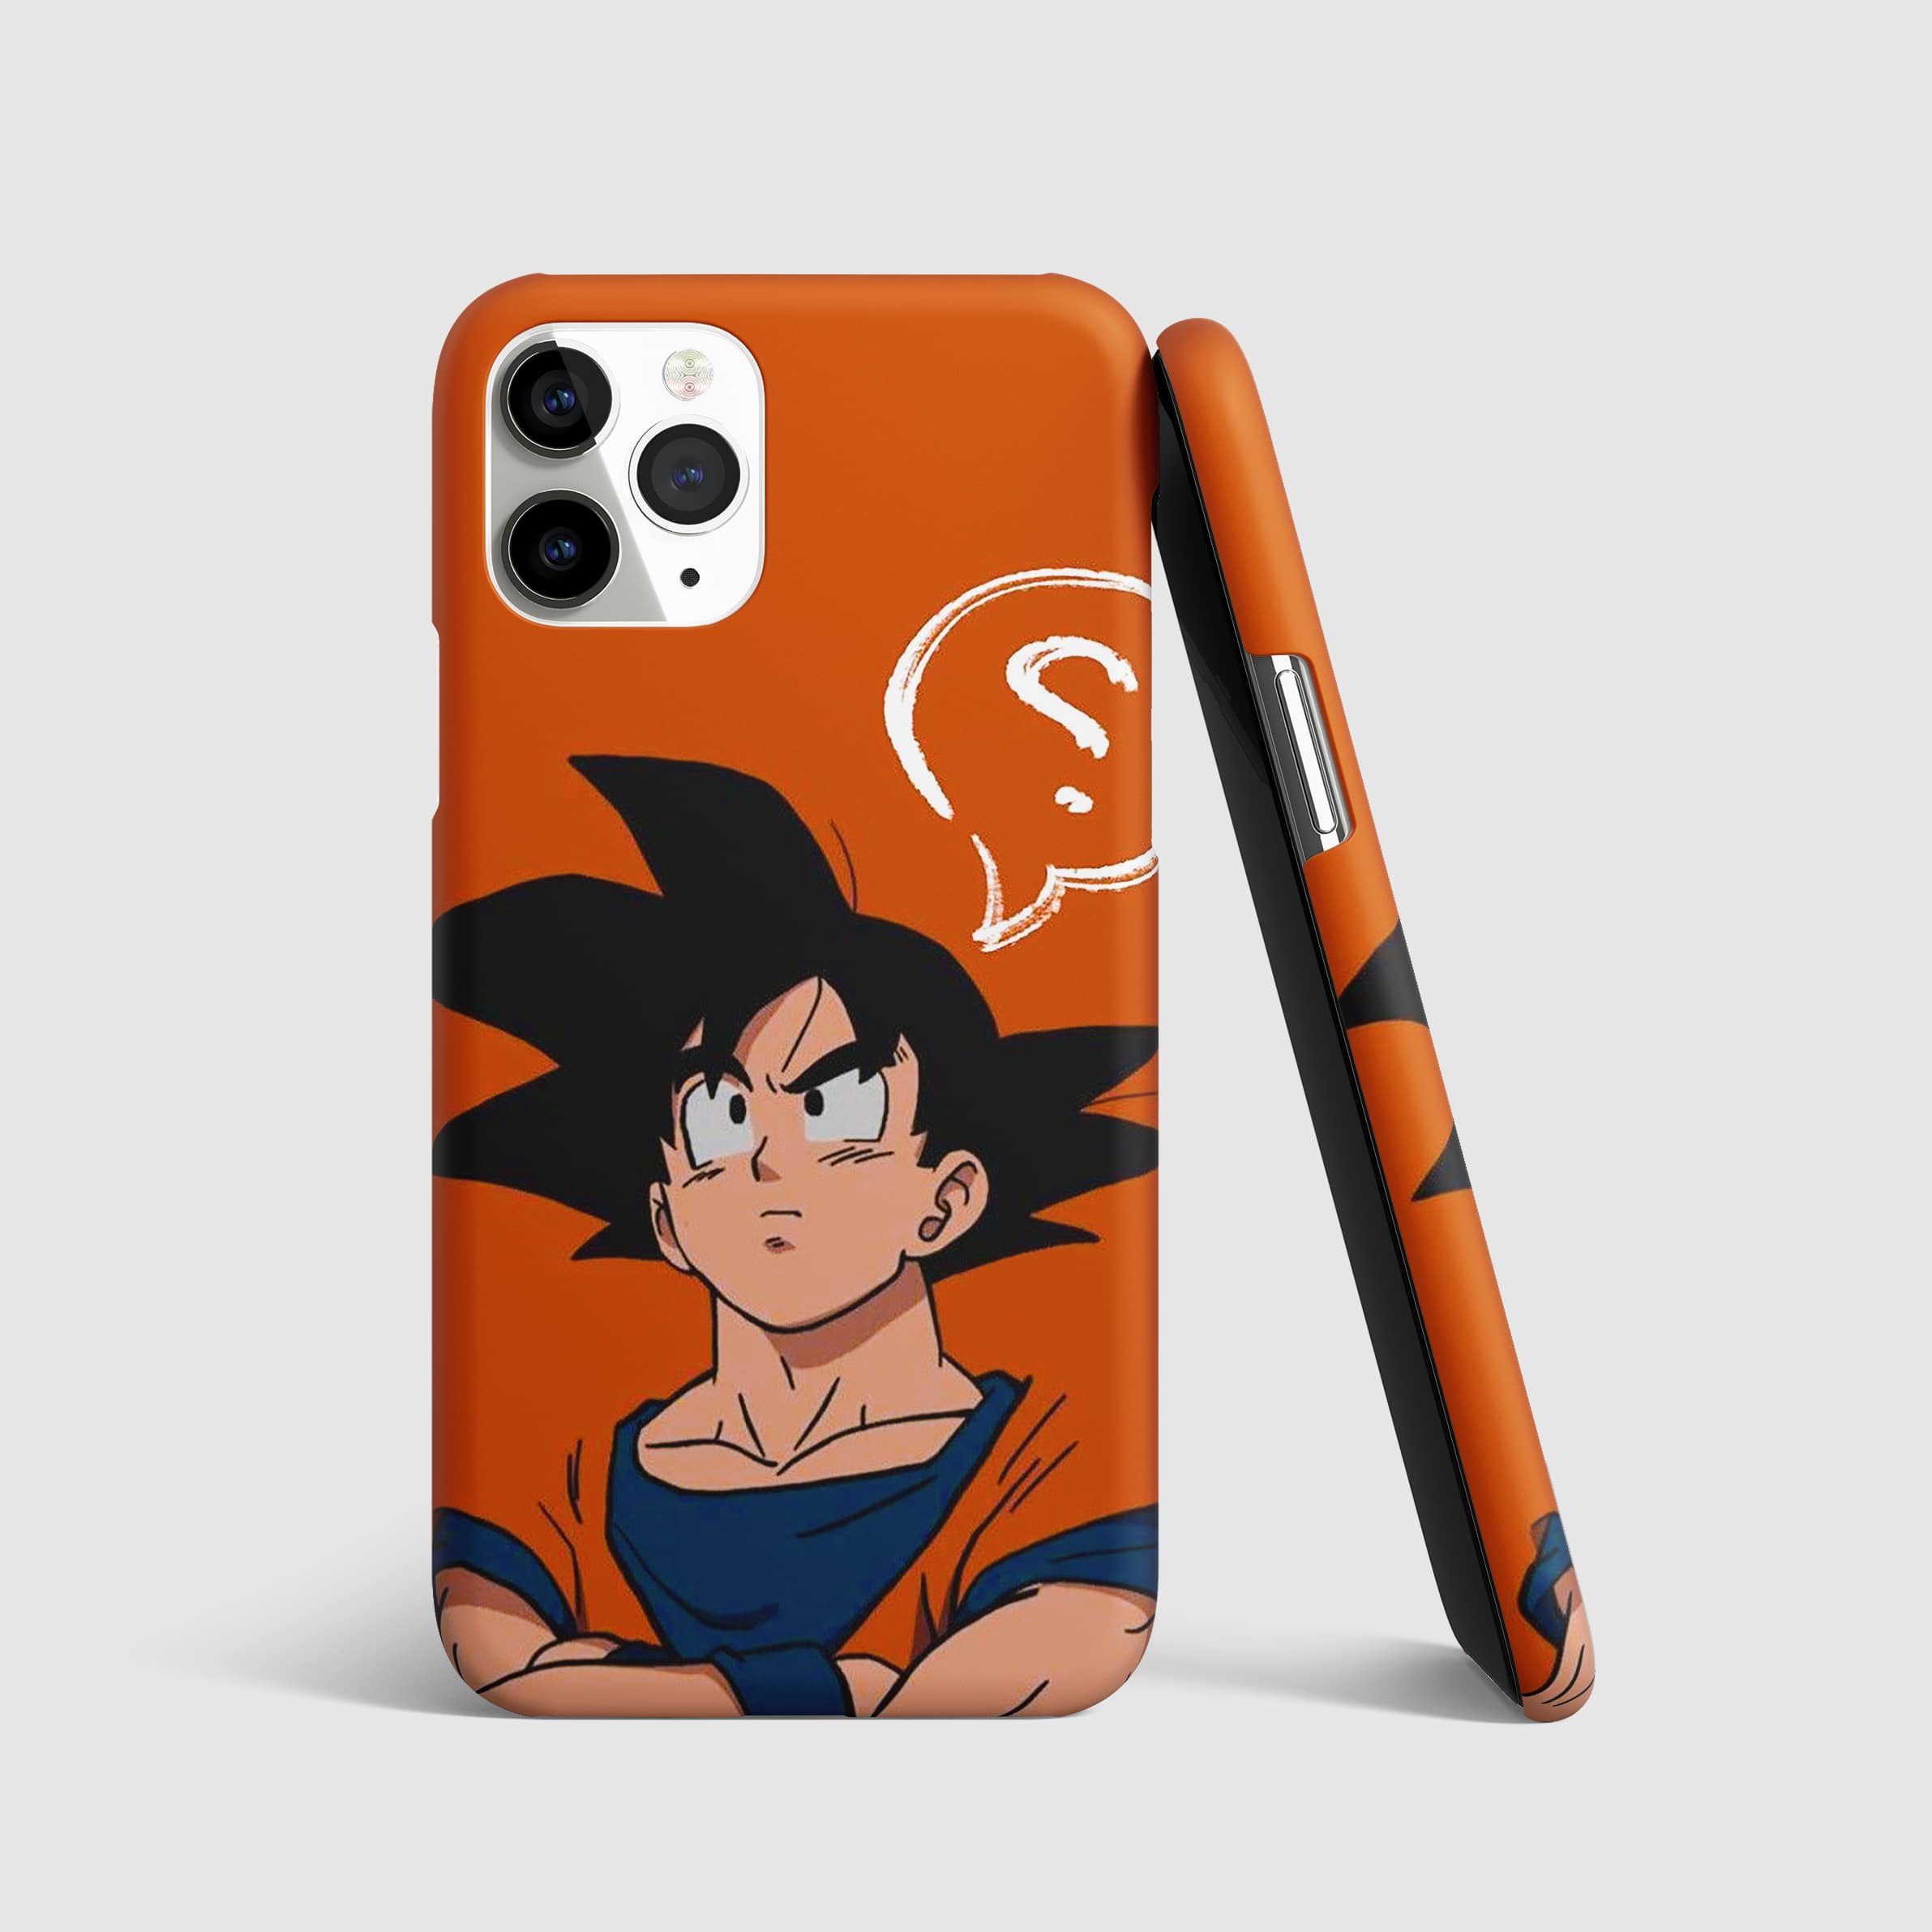 Goku in orange gi performing a move on phone cover.